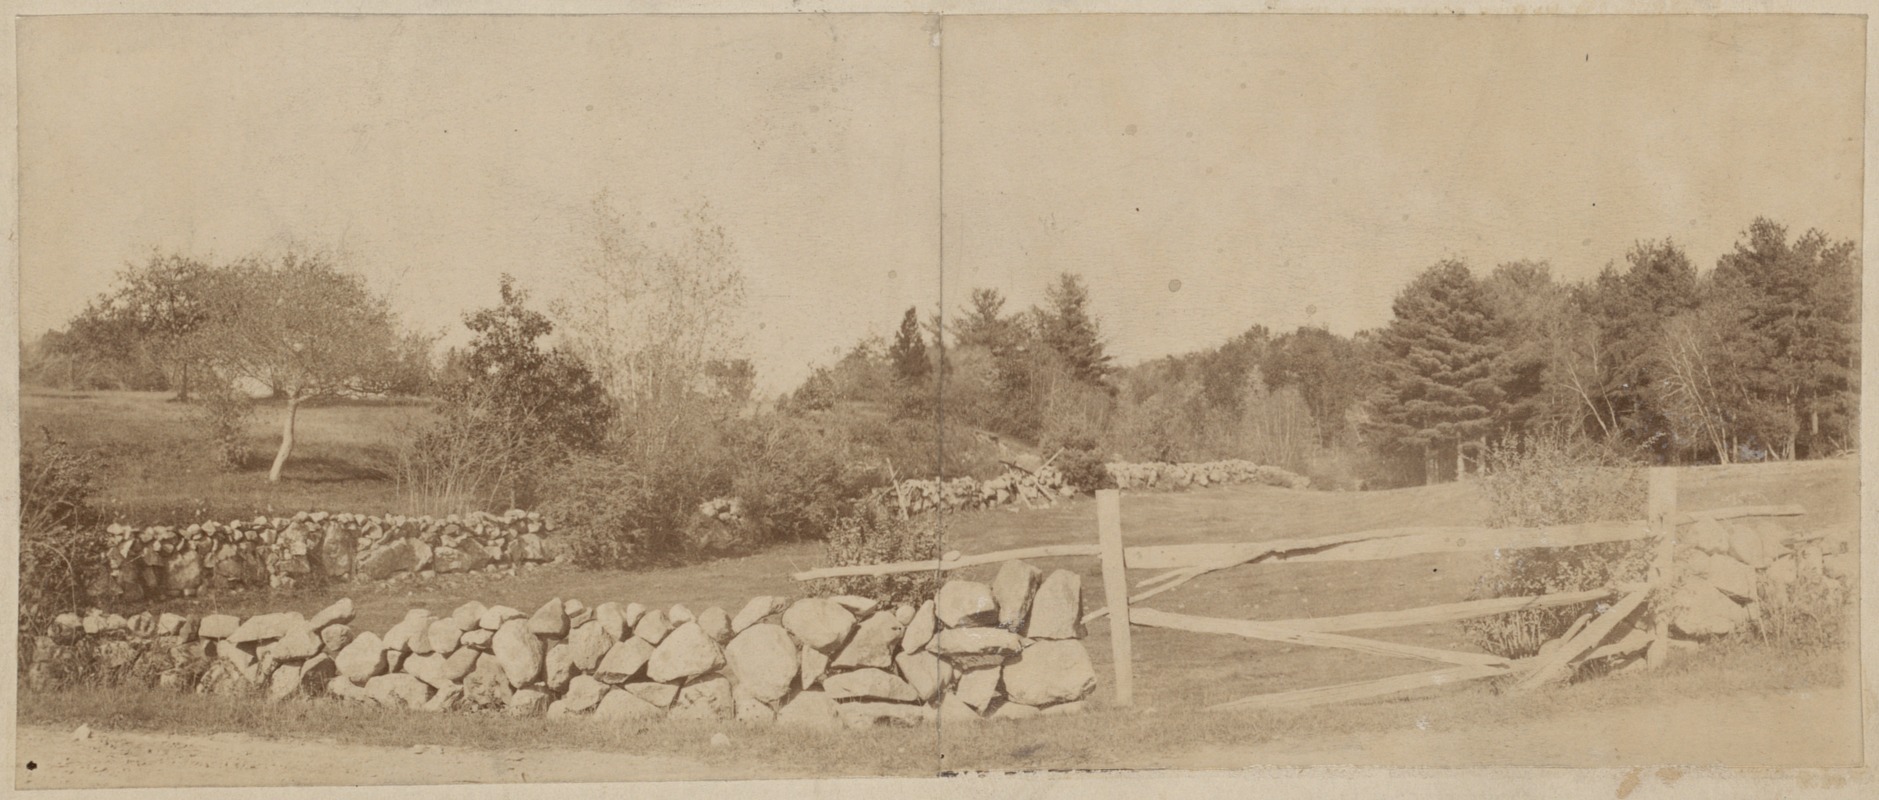 Parks: View of stone wall and fence in Arnold Arboretum, Jamaica Plain